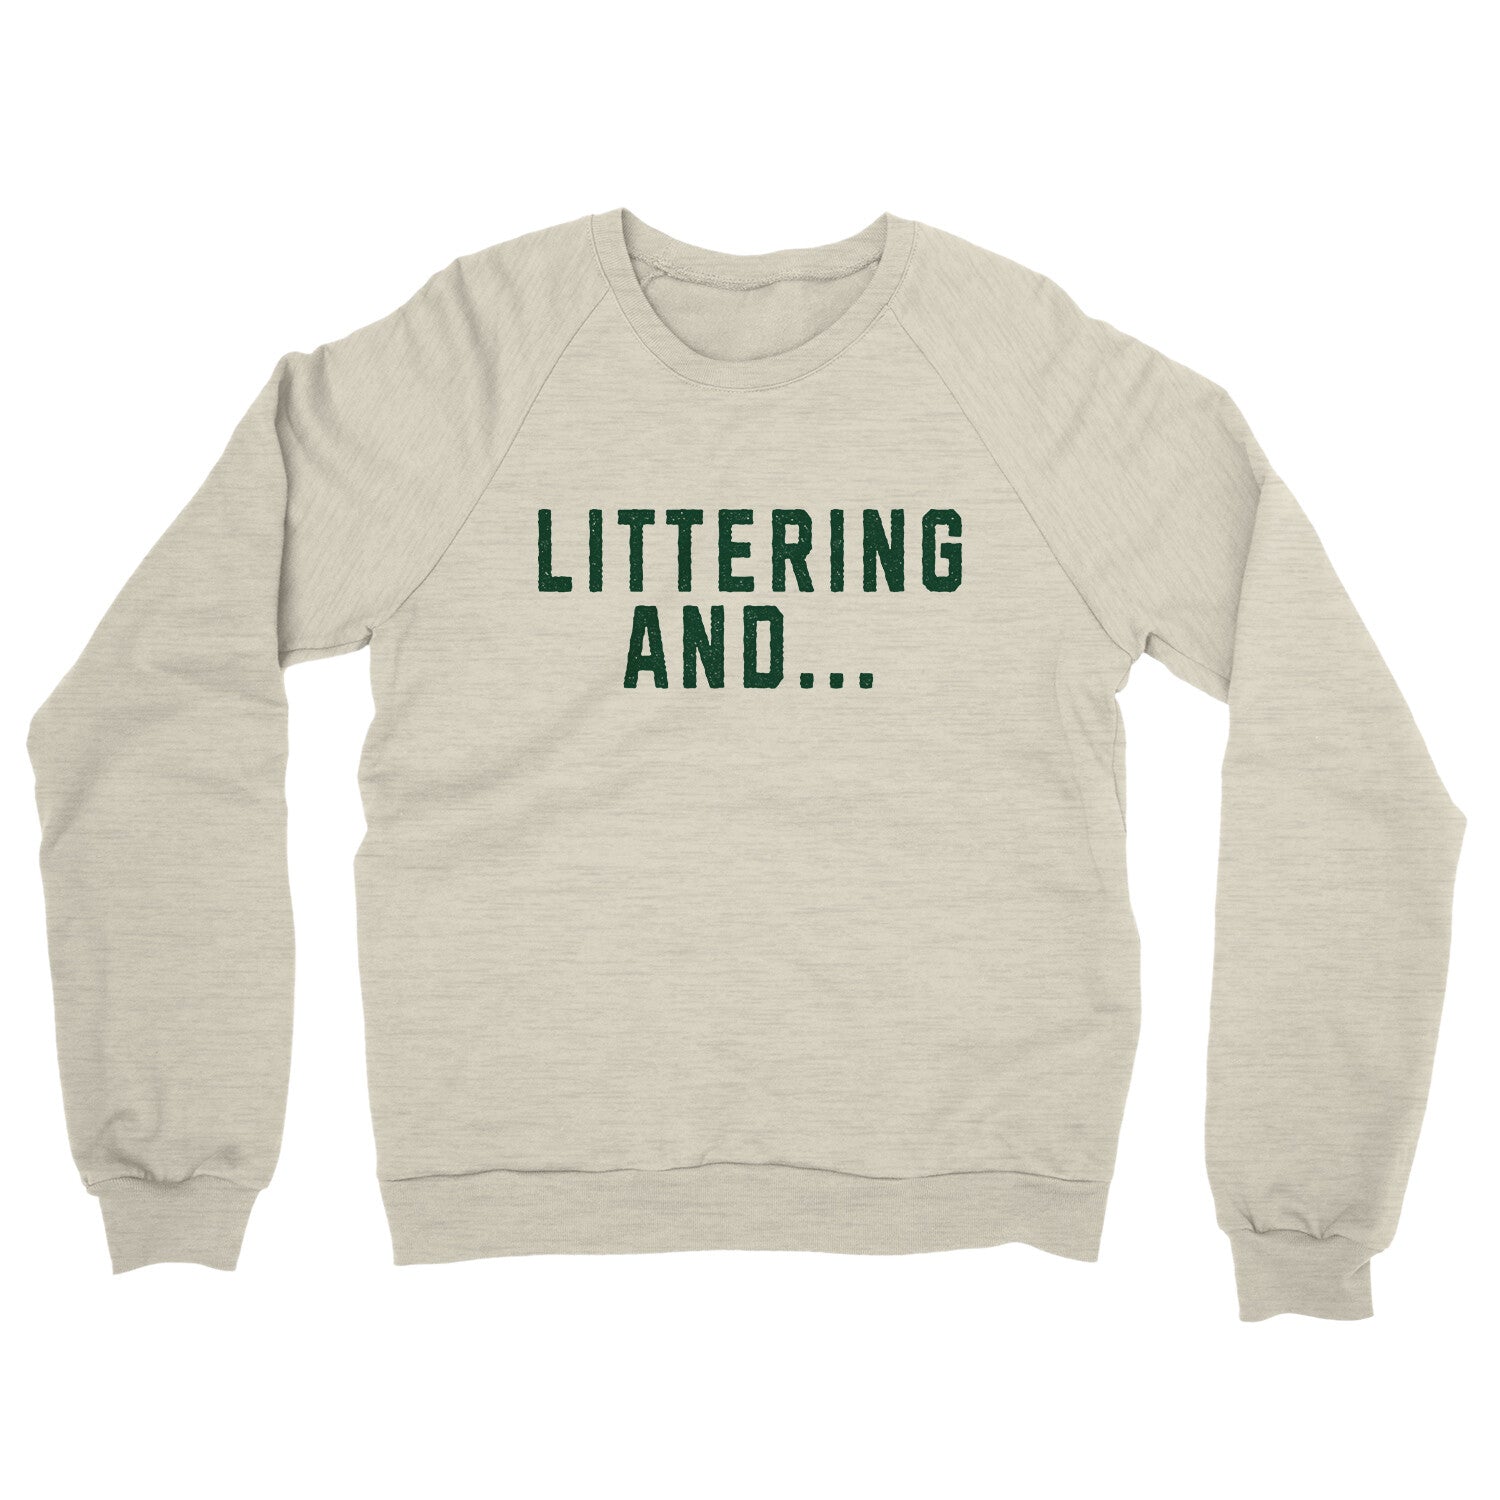 Littering And in Heather Oatmeal Color